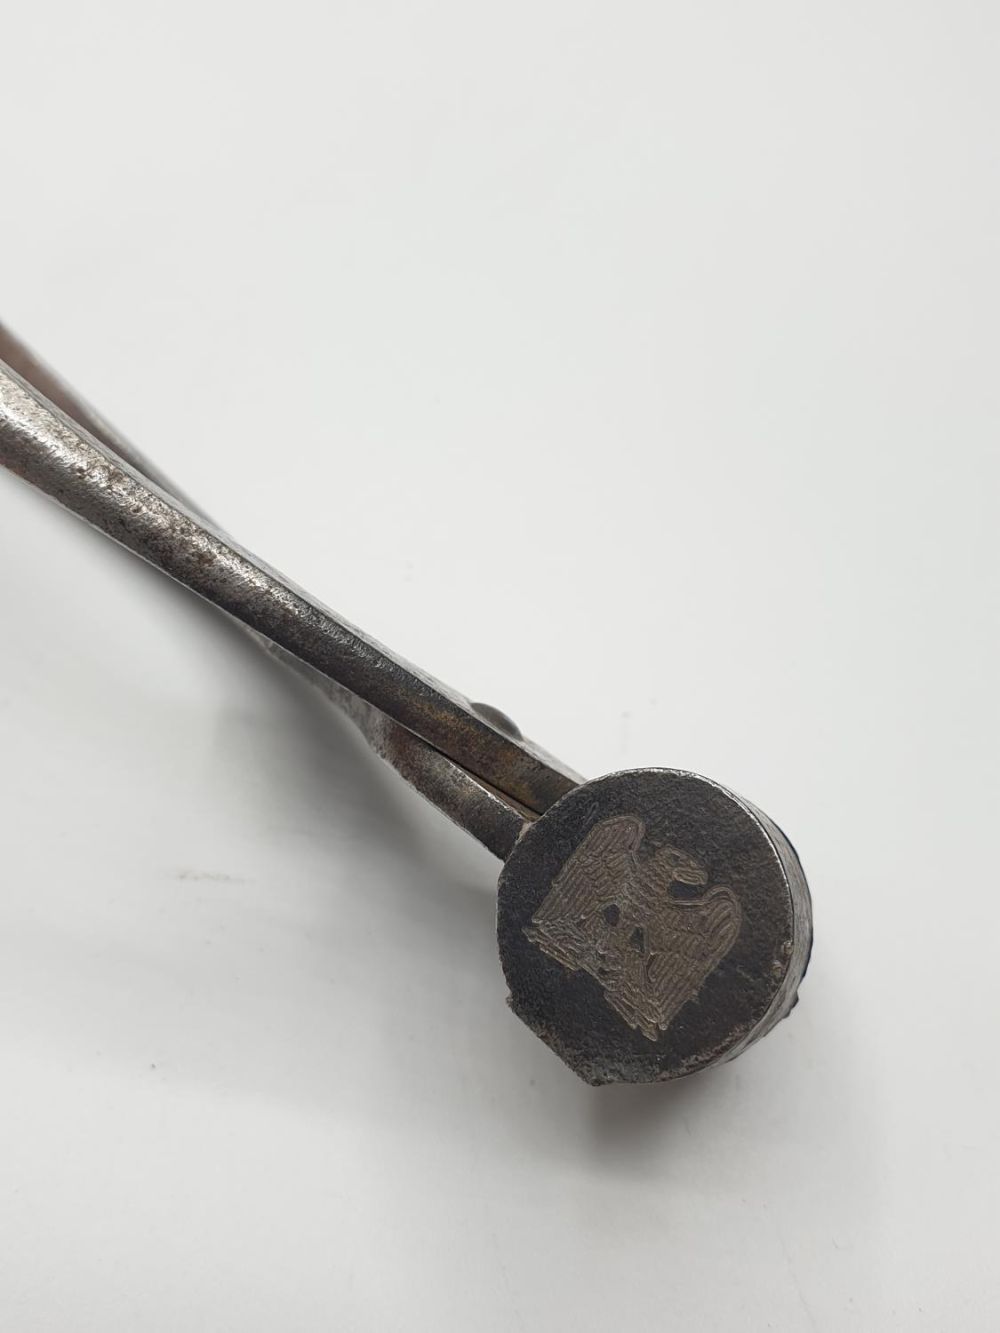 French Musket Ball Mould with Sprew Cutter, Maybe Napoleonic period? - Image 3 of 3